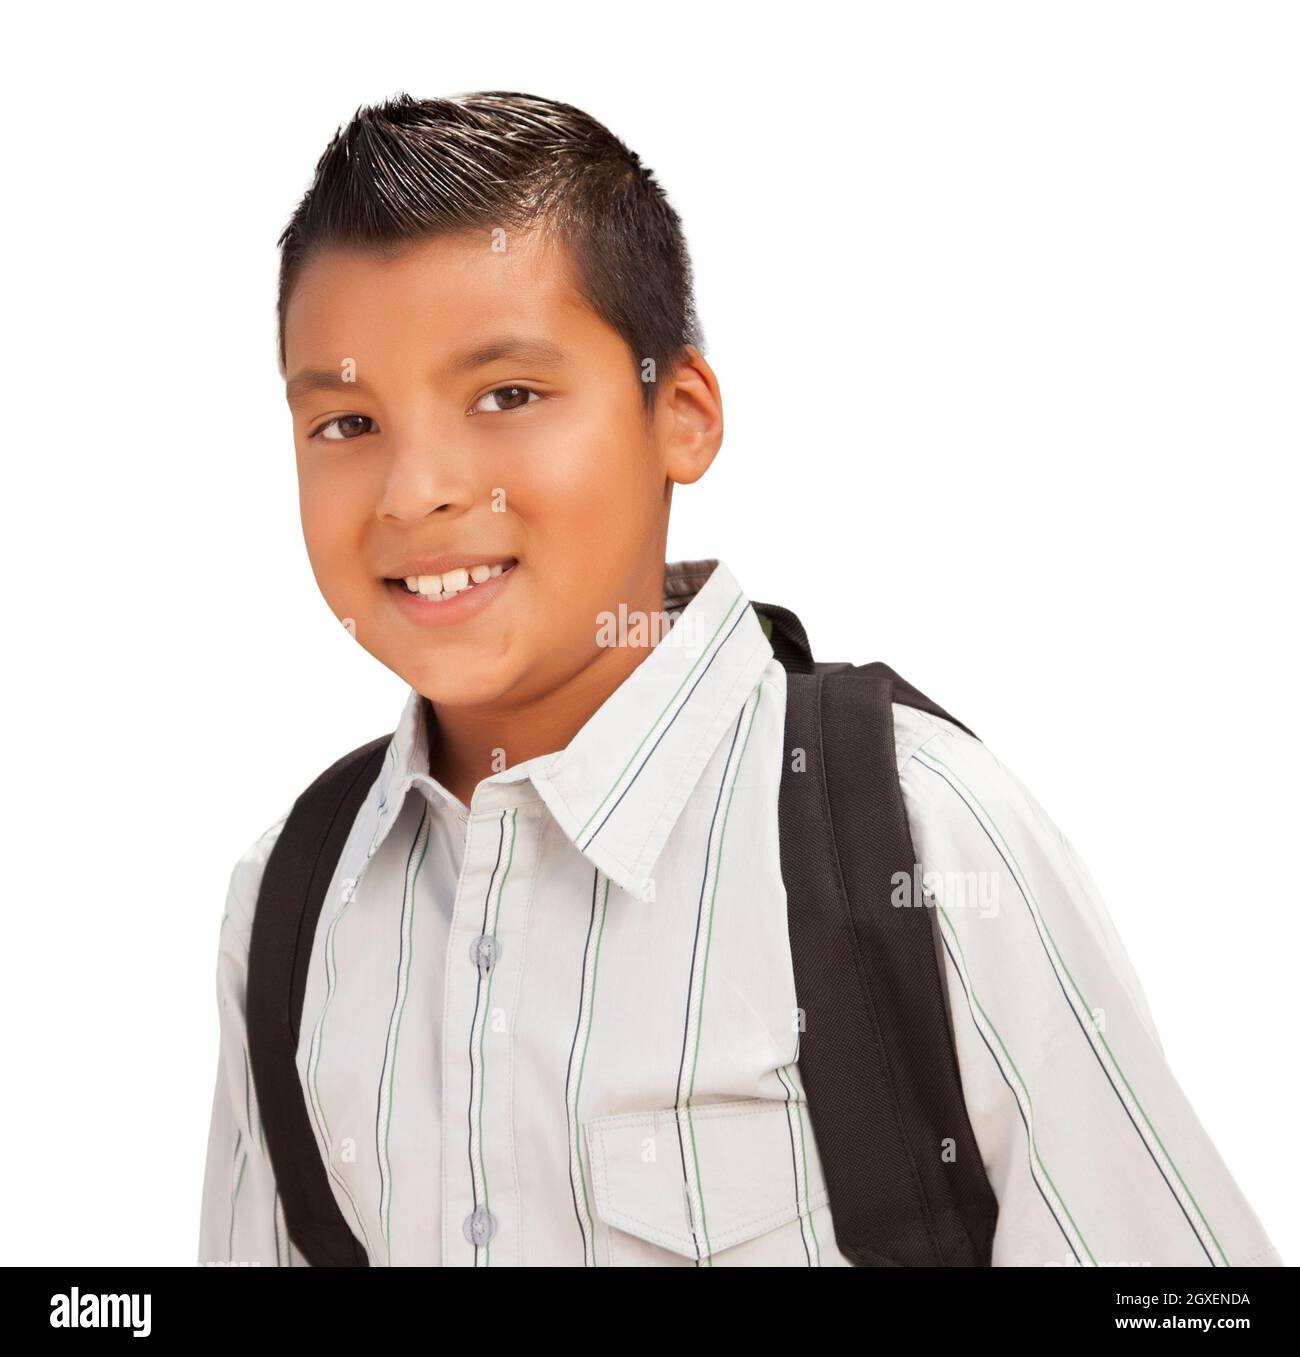 https://c8.alamy.com/comp/2GXENDA/happy-young-hispanic-boy-with-backpack-ready-for-school-isolated-on-a-white-background-2GXENDA.jpg